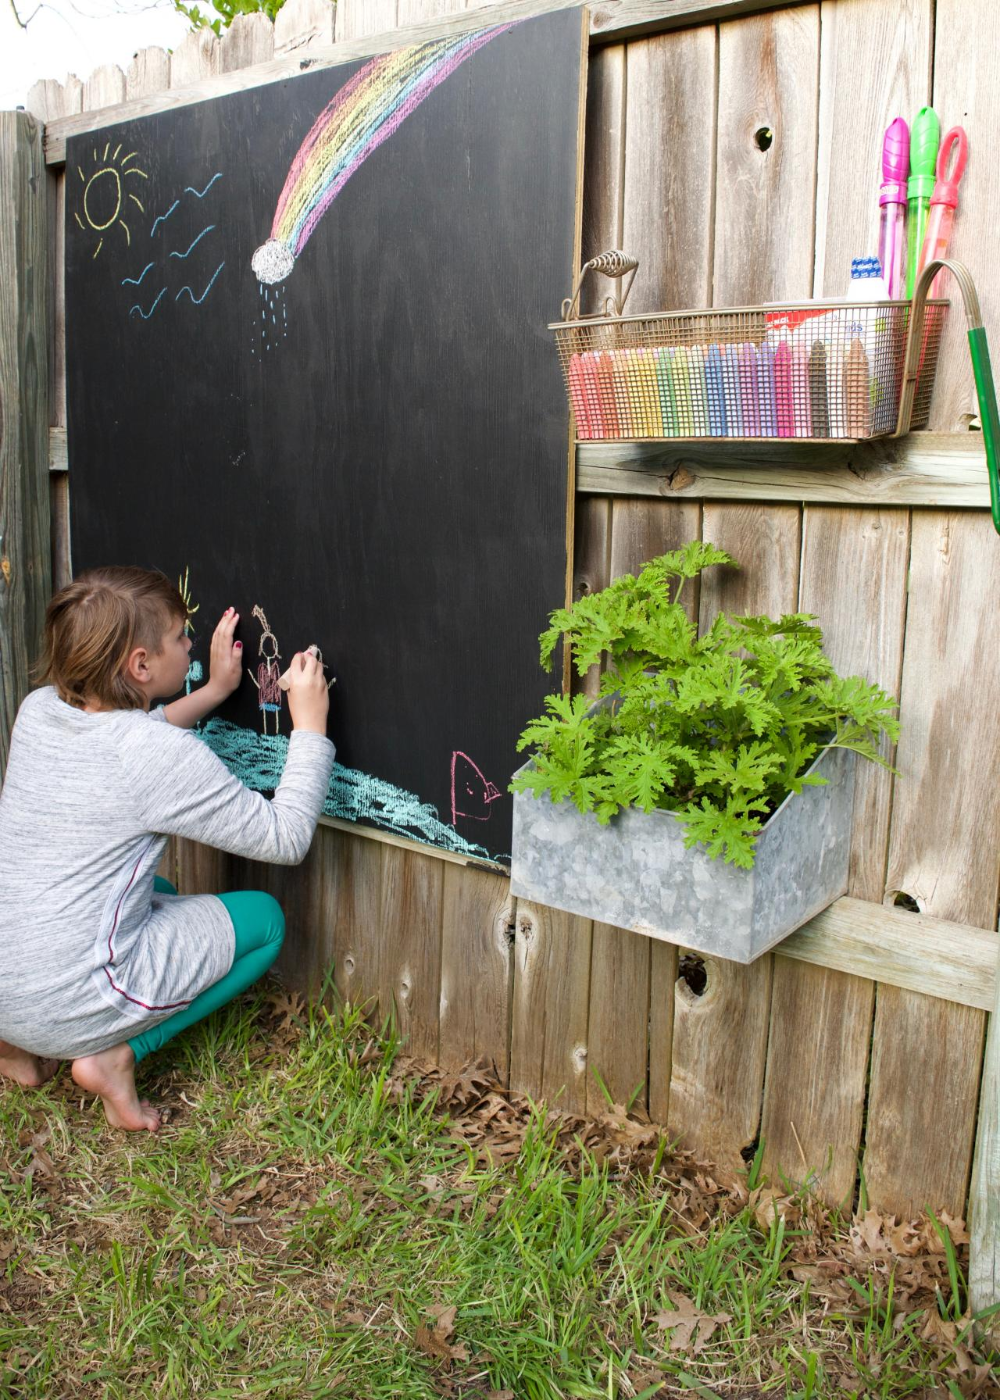 How to Make an Outdoor Chalkboard Activity Wall for Kids - How to Make an Outdoor Chalkboard Activity Wall for Kids -   24 diy Outdoor wall ideas